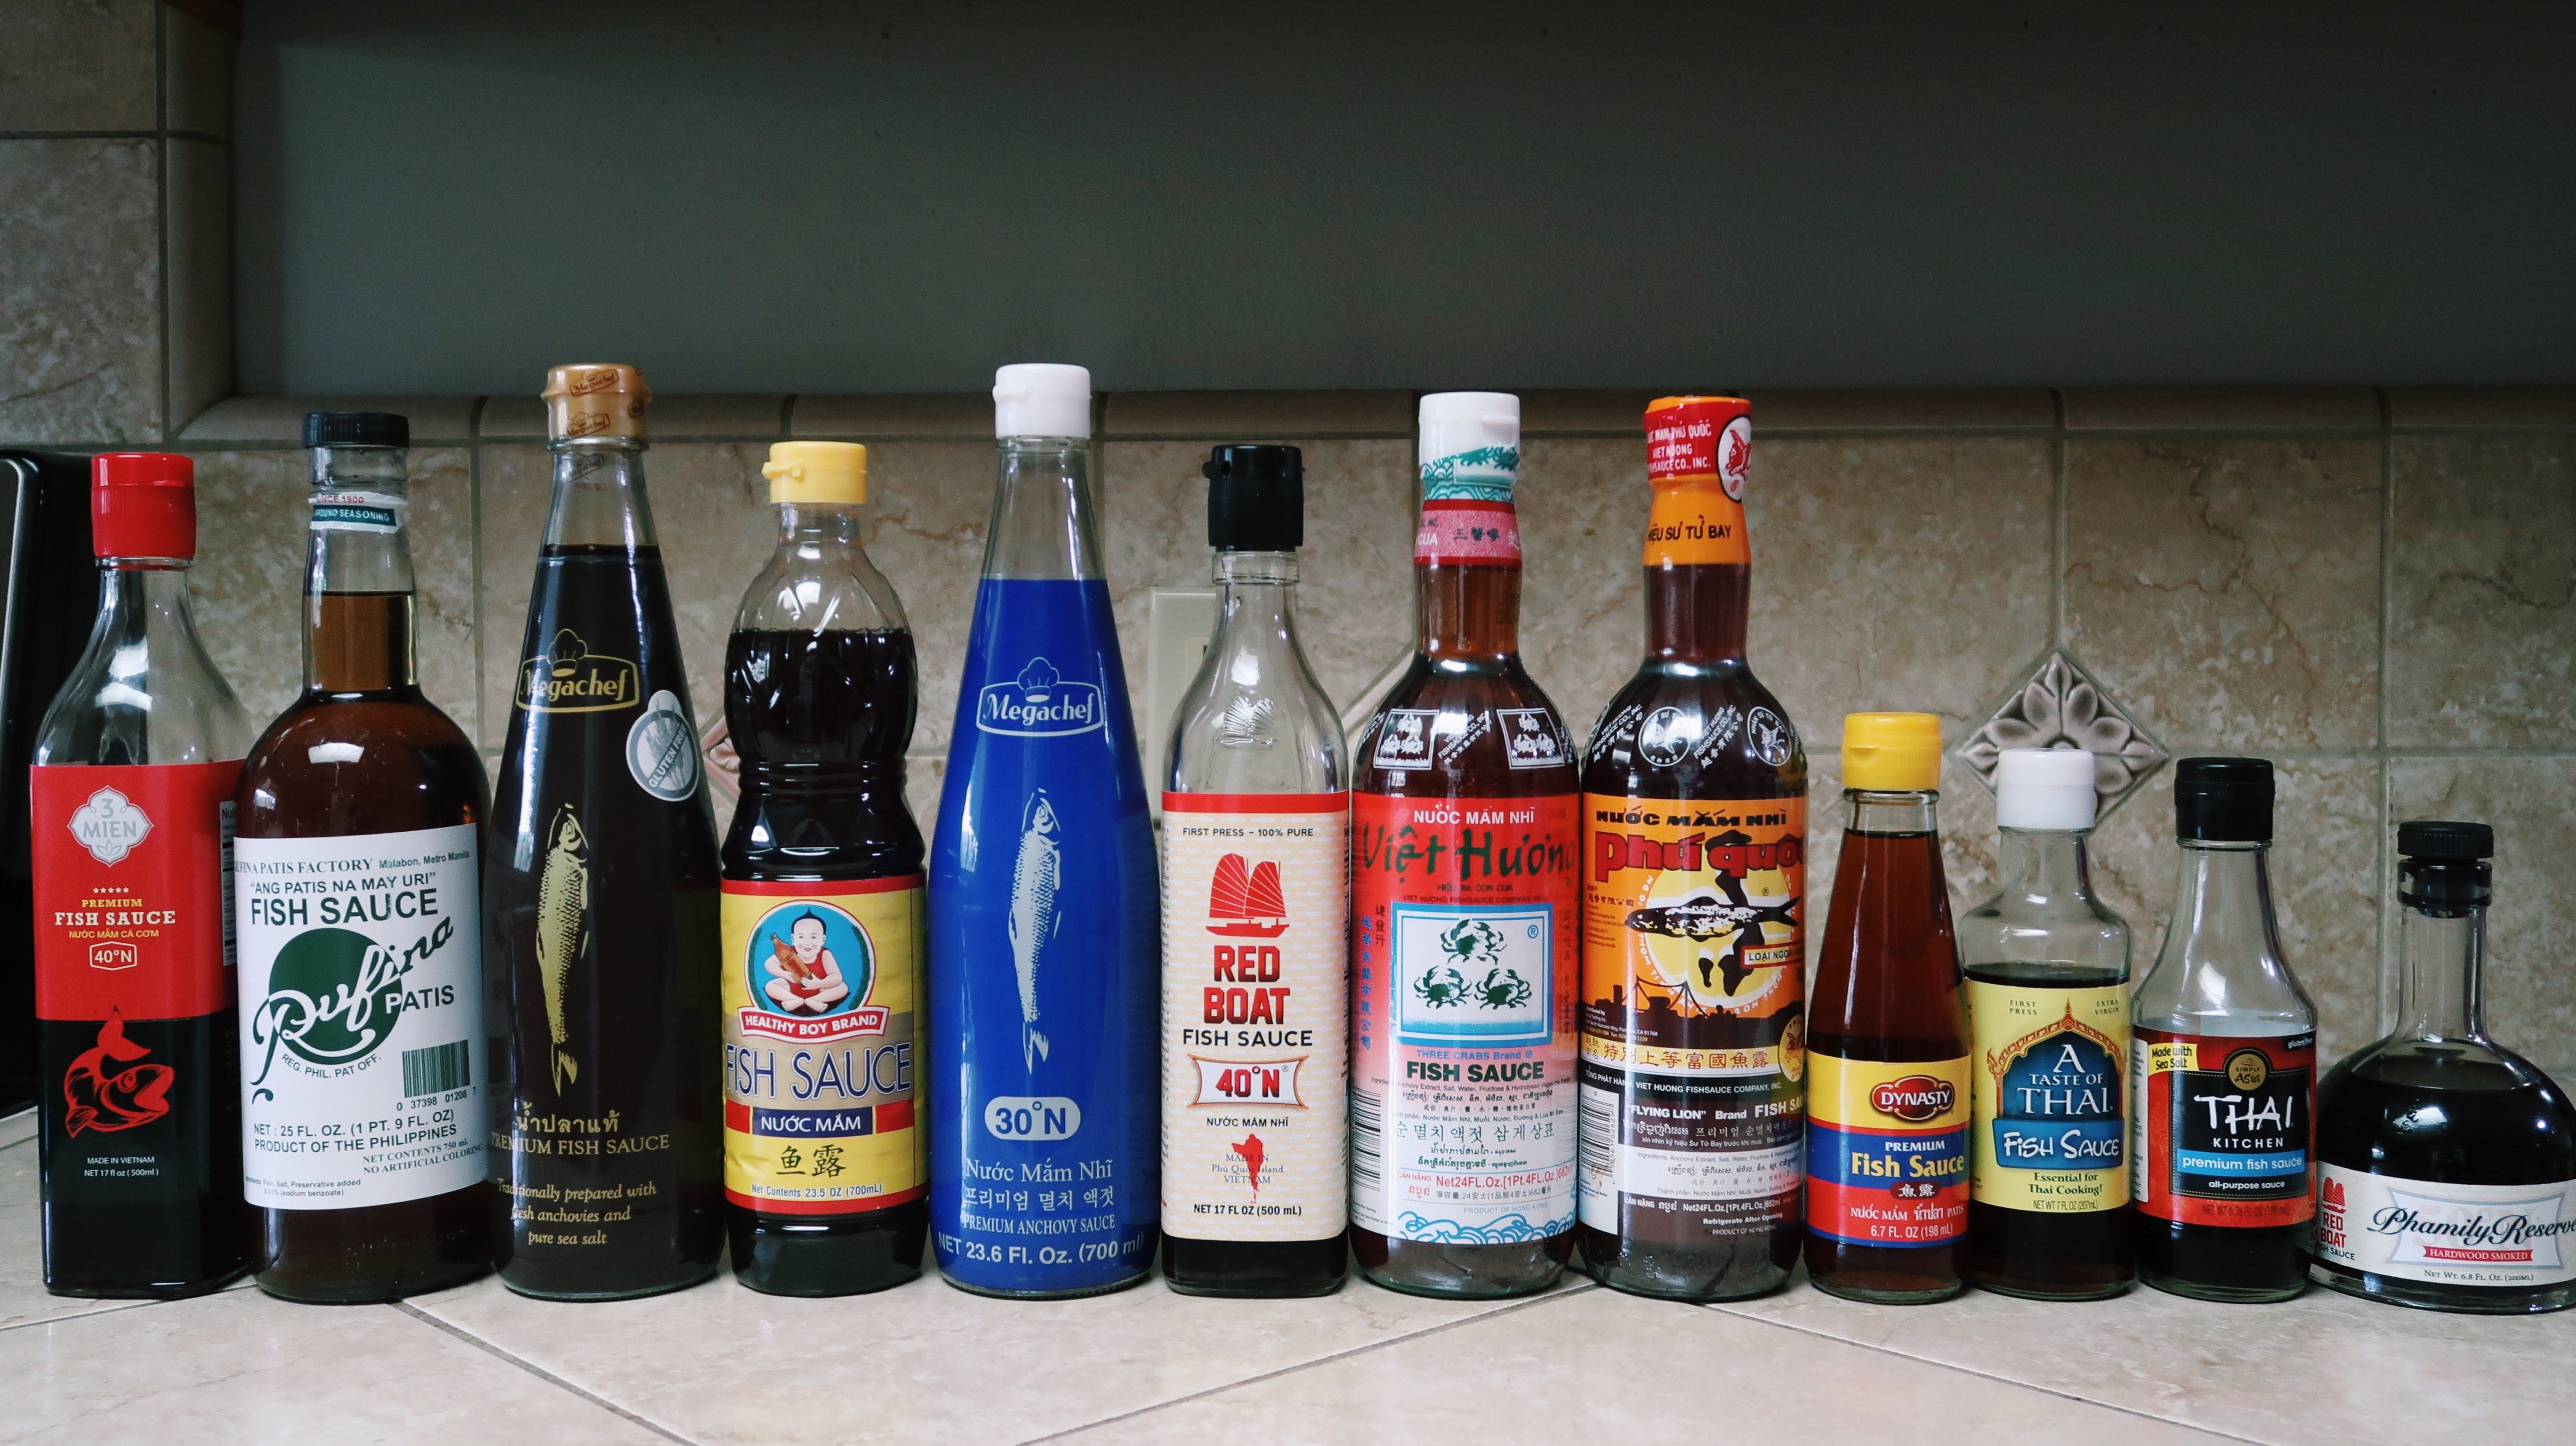 One Bottle Of Fish Sauce Is Not Enough | Taste